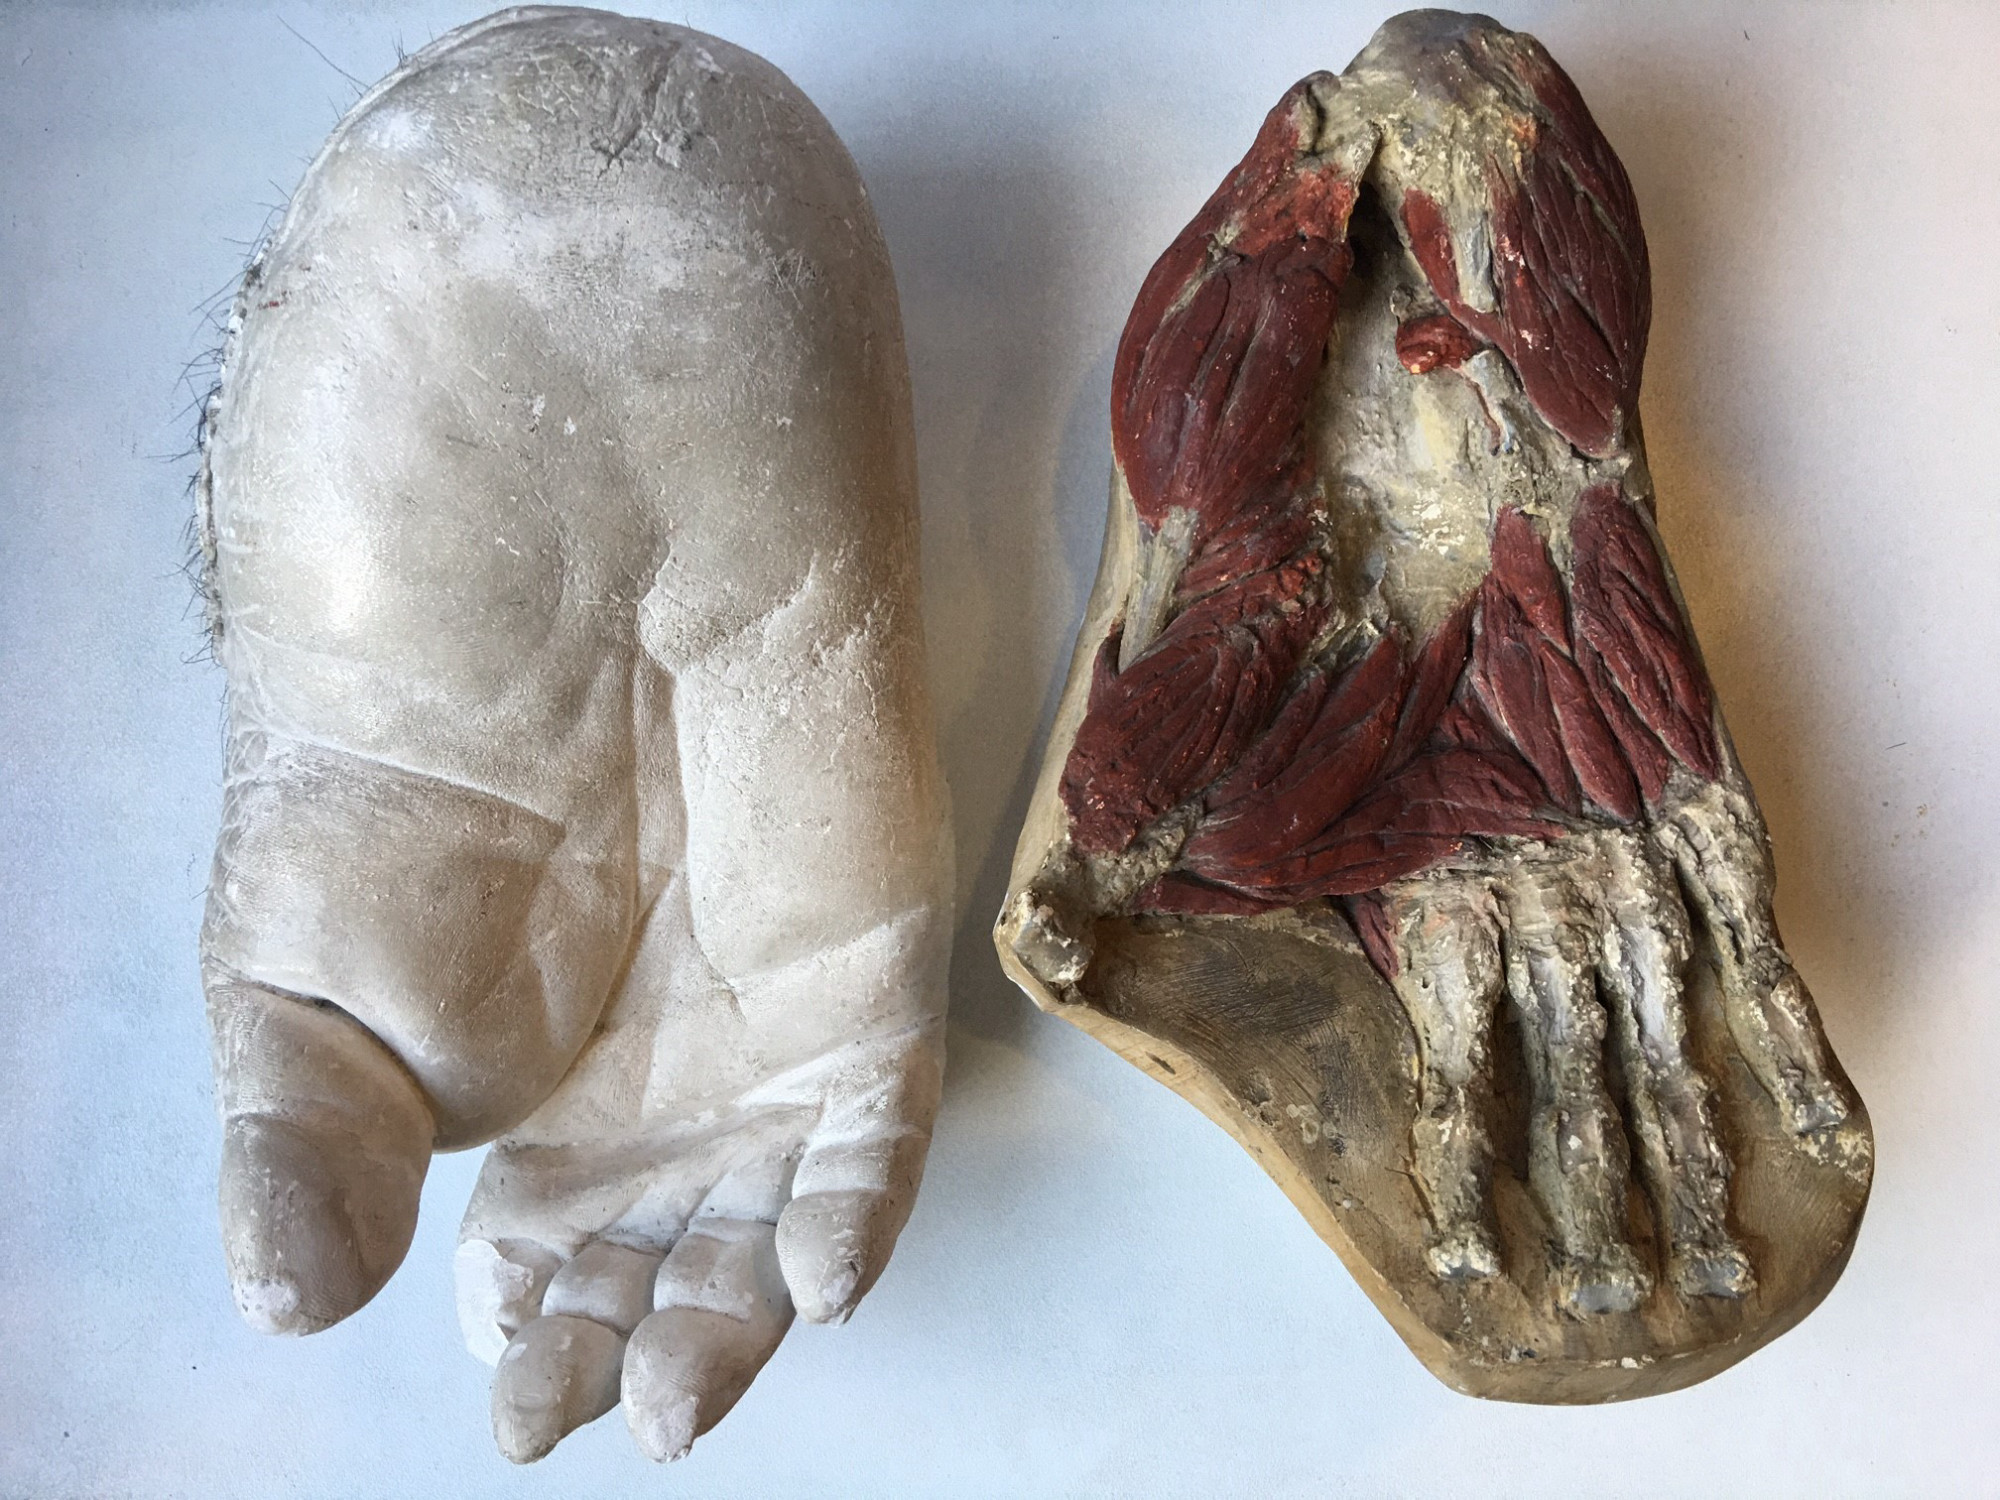 Two plaster casts of "Bobby" the gorilla's foot from above. The muscles in the left cast have been exposed and coloured. Next to it is a white plaster cast of the foot.